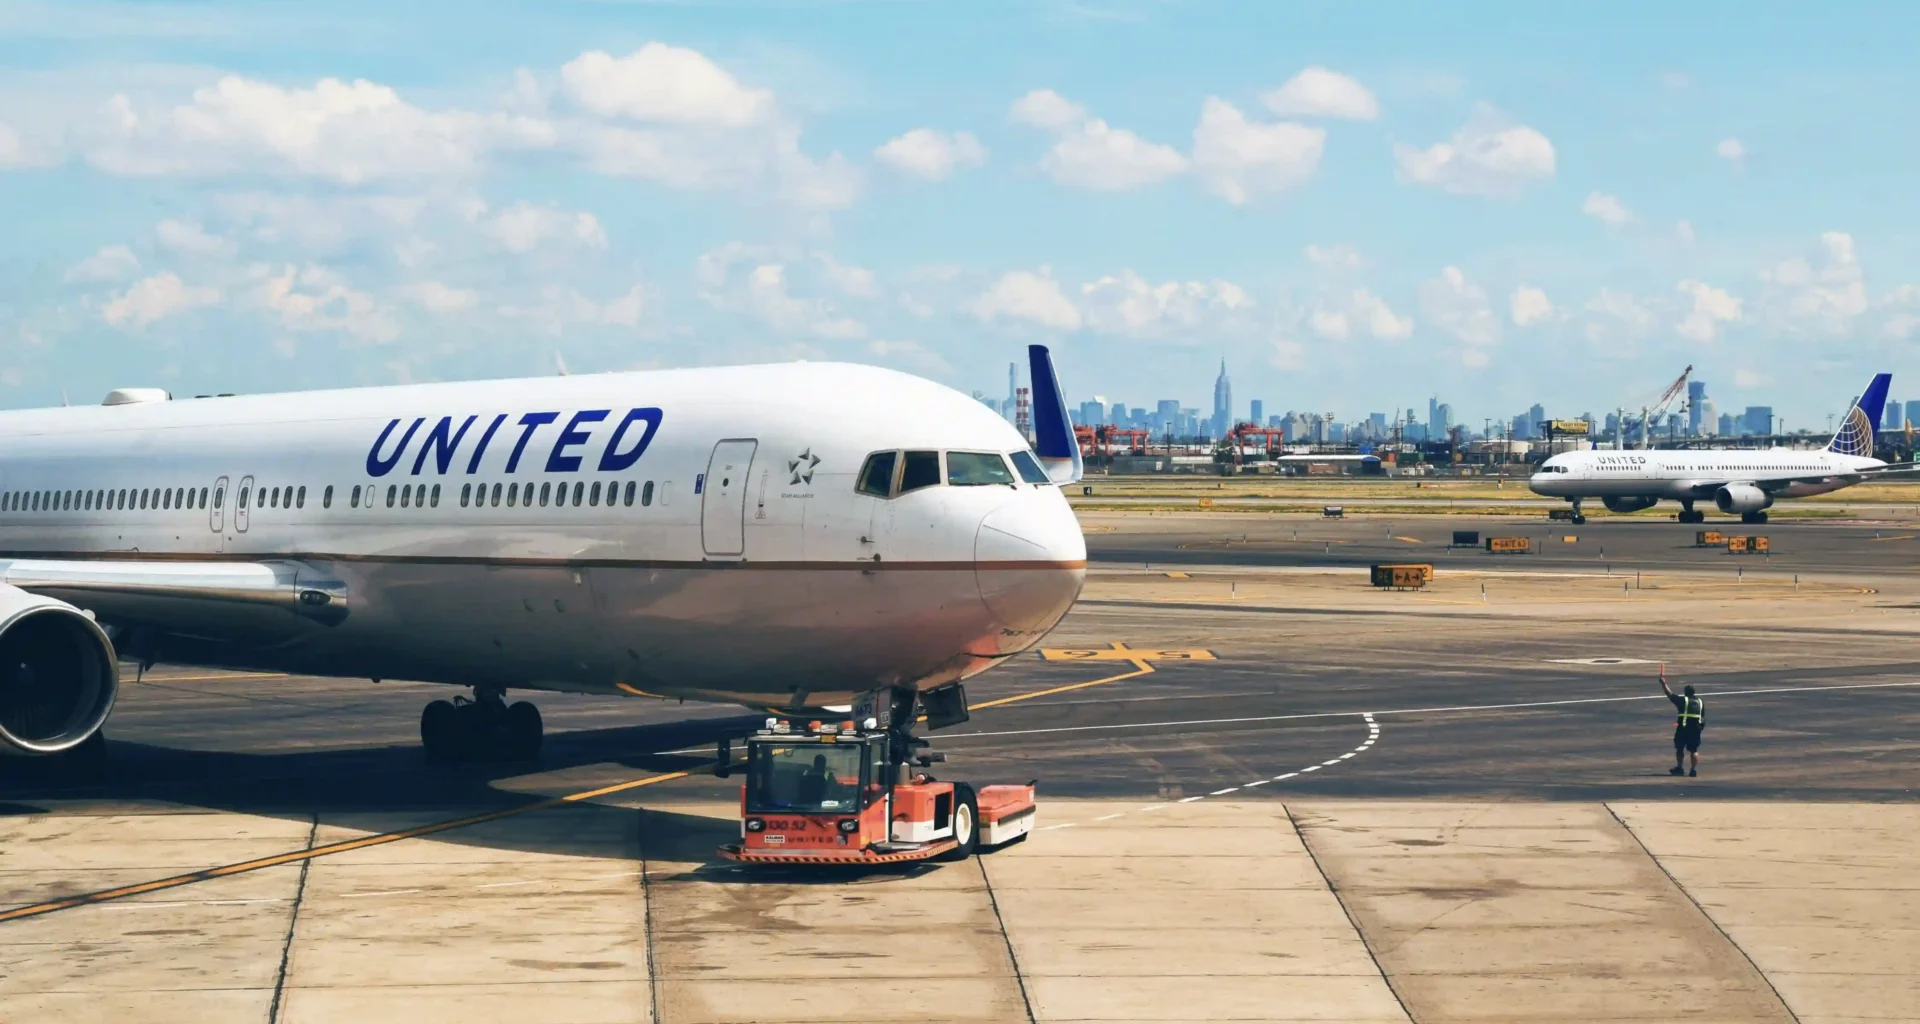 United Airlines aircraft on tarmac